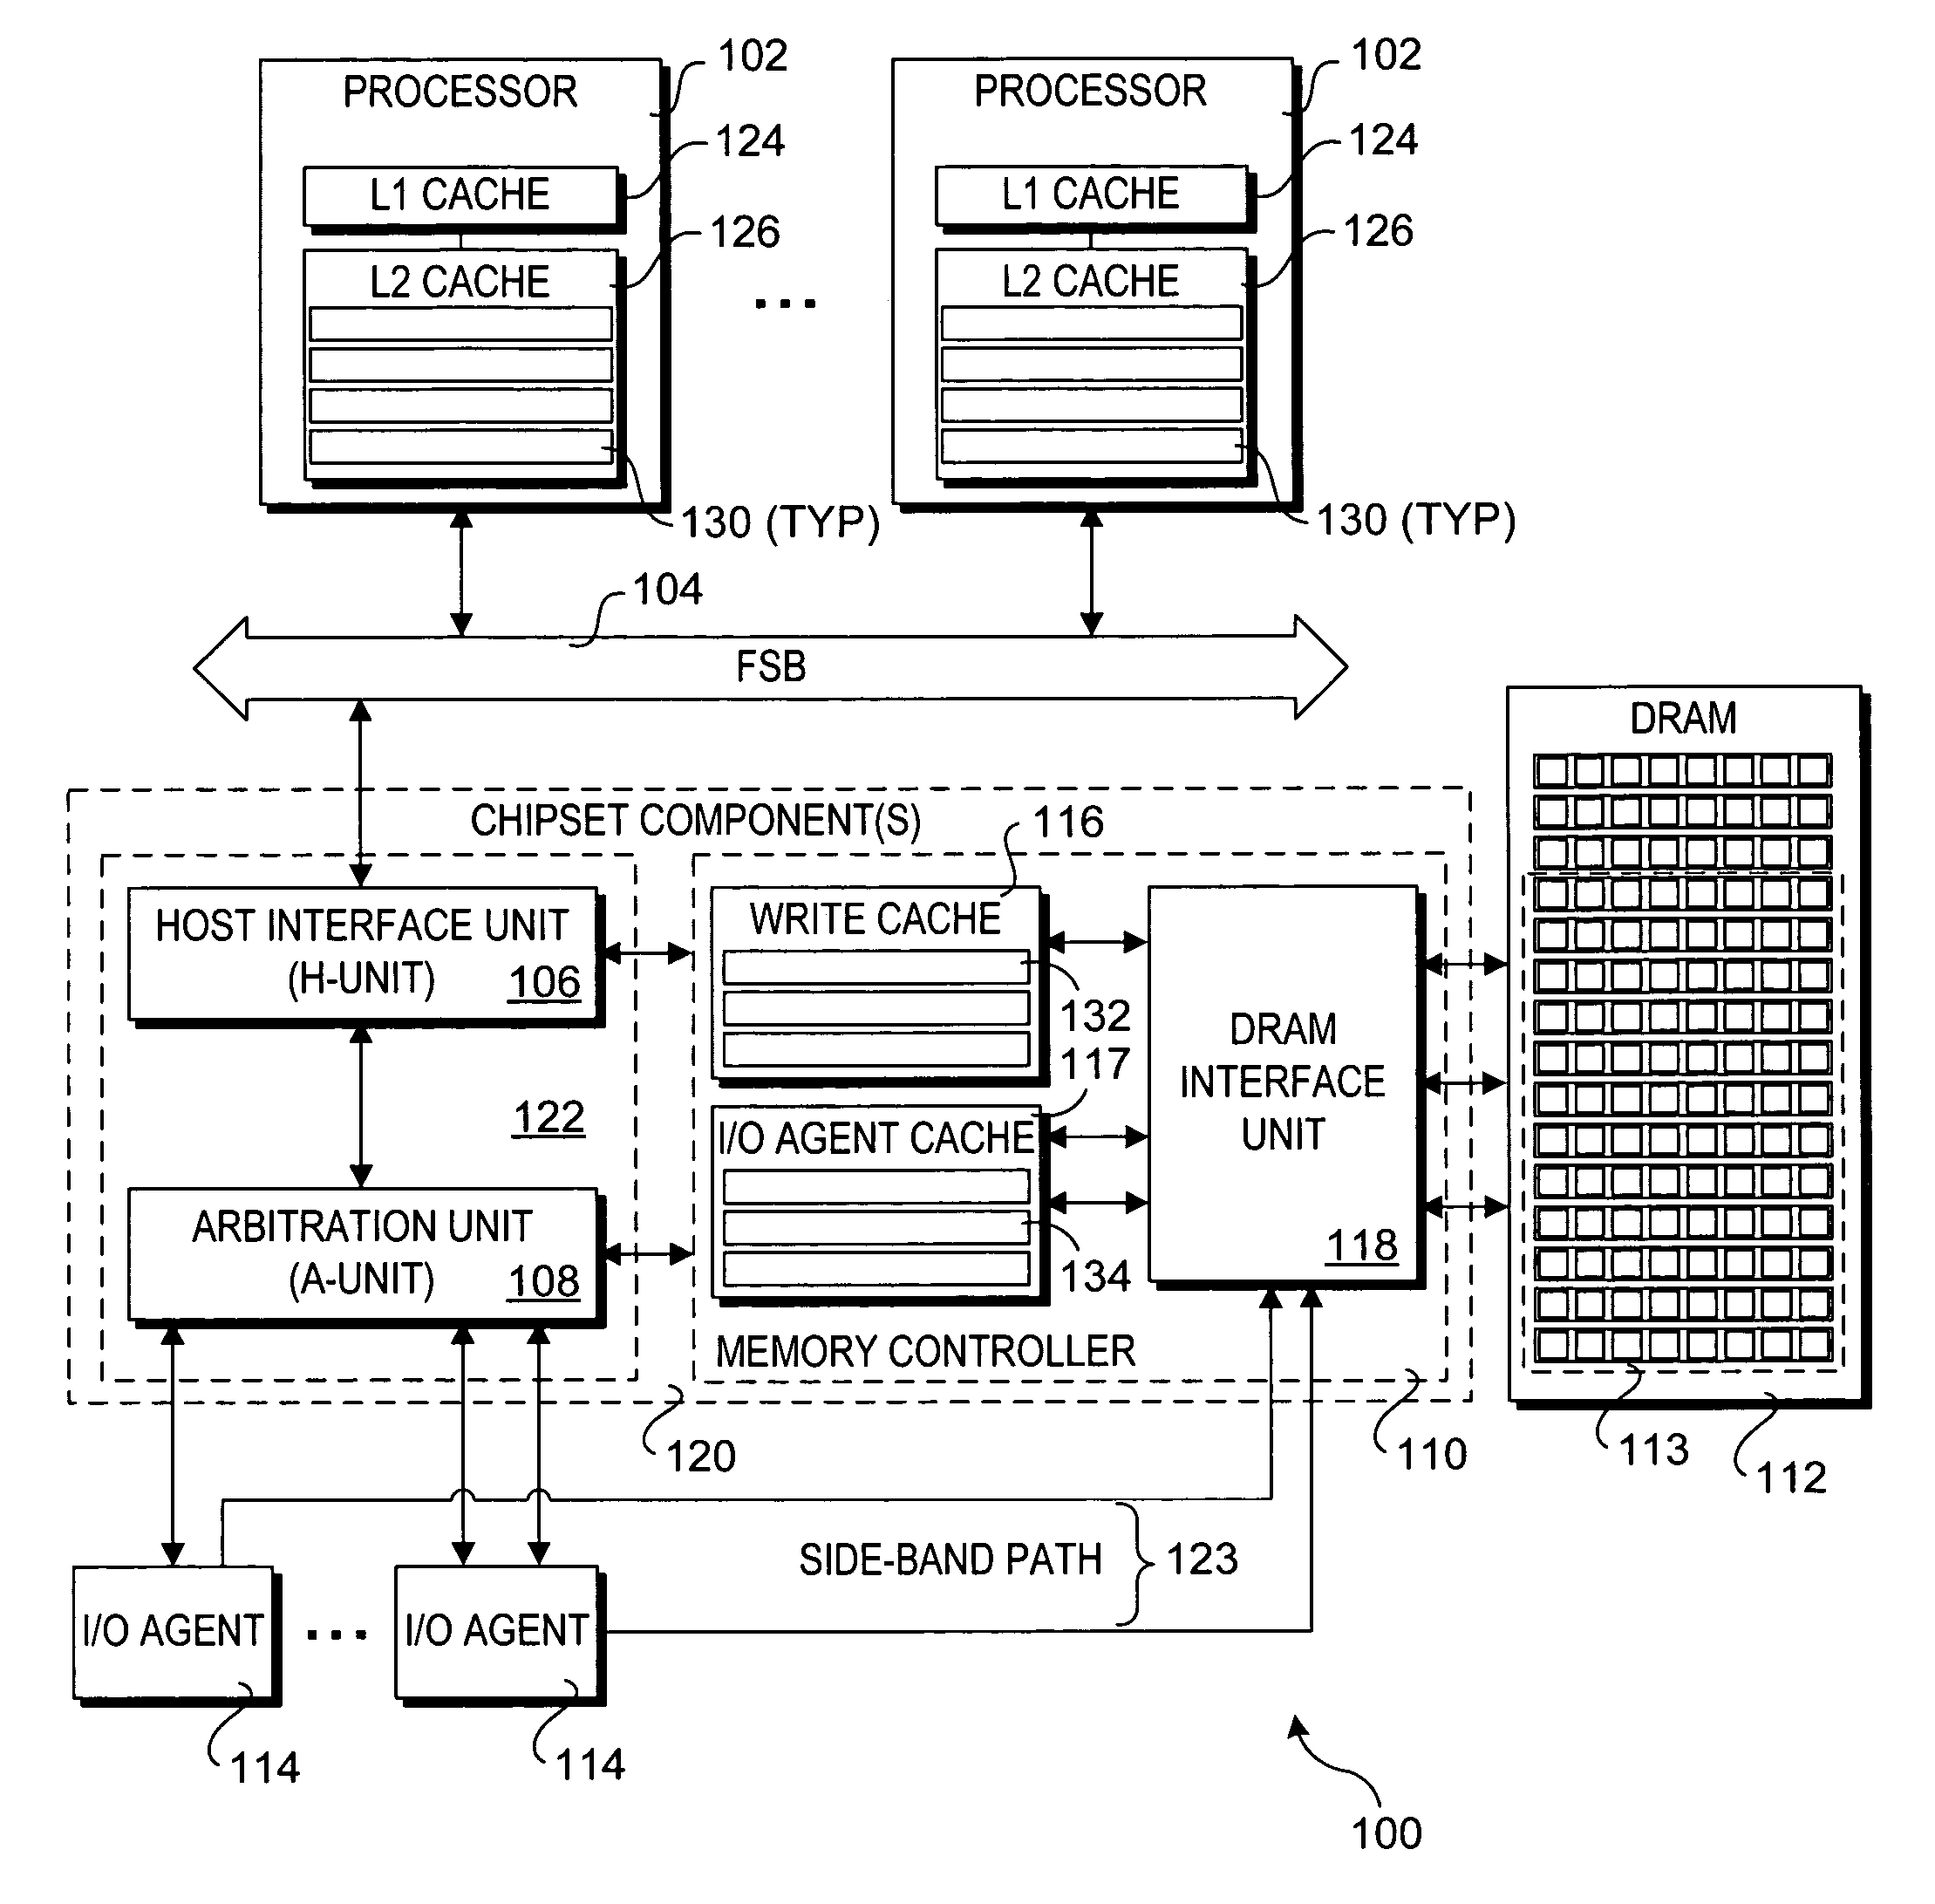 Method and apparatus to enable I/O agents to perform atomic operations in shared, coherent memory spaces